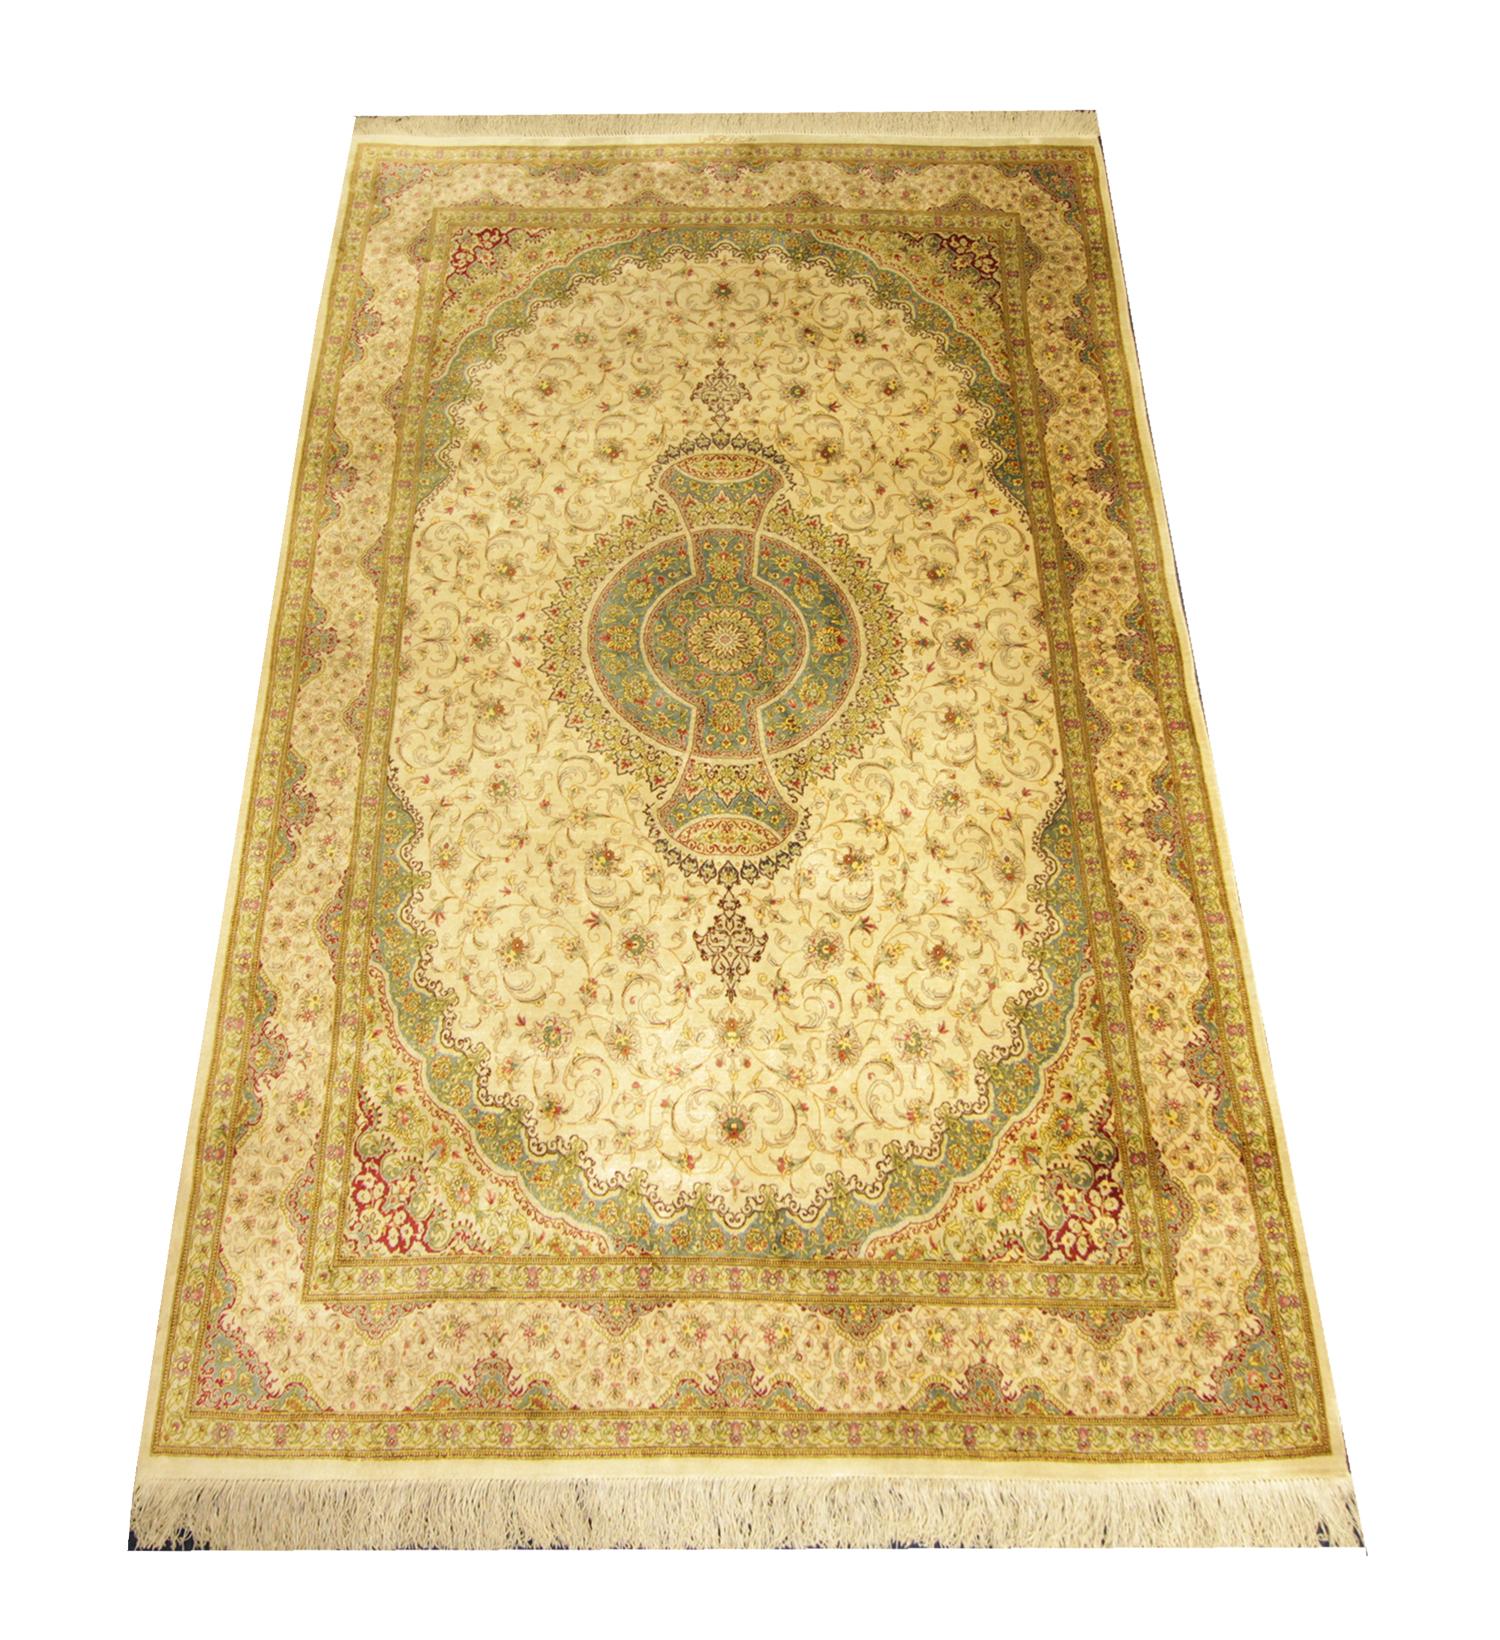 This fine Turkish silk rug was woven with the finest organic materials. The central design has been woven on a cream background with beige and green accents that make up the symmetrical flowing floral medallion design. This fine oriental rug